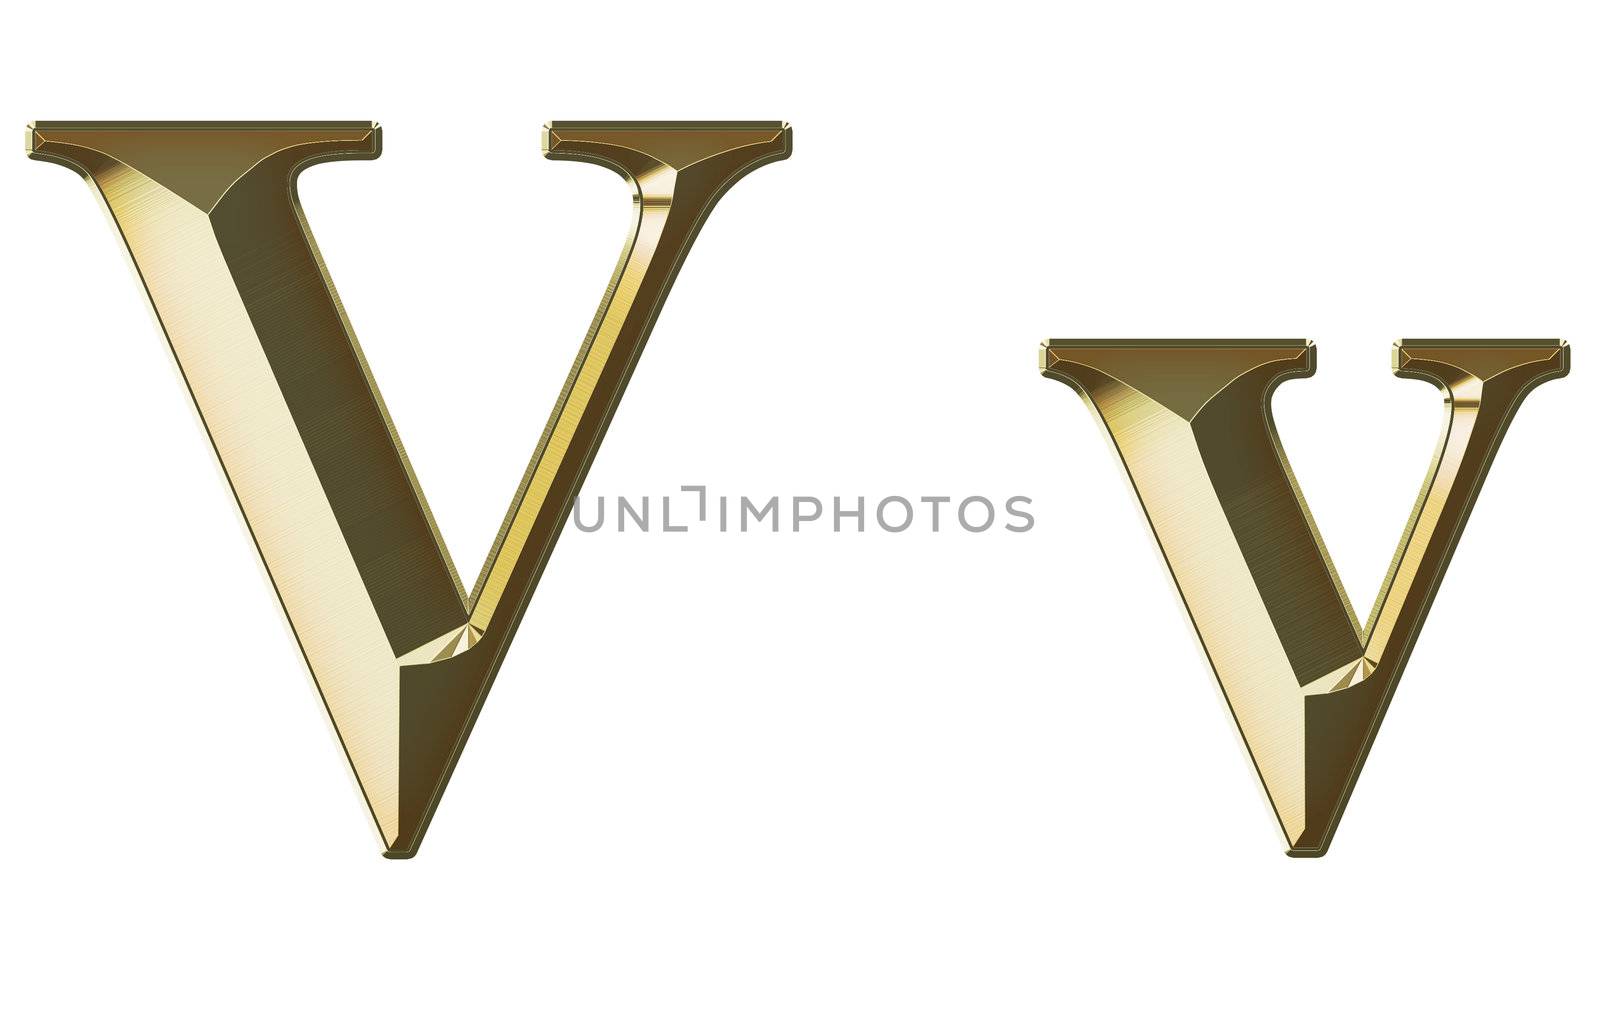 Exclusive collection font from brushed gold on white background by mozzyb